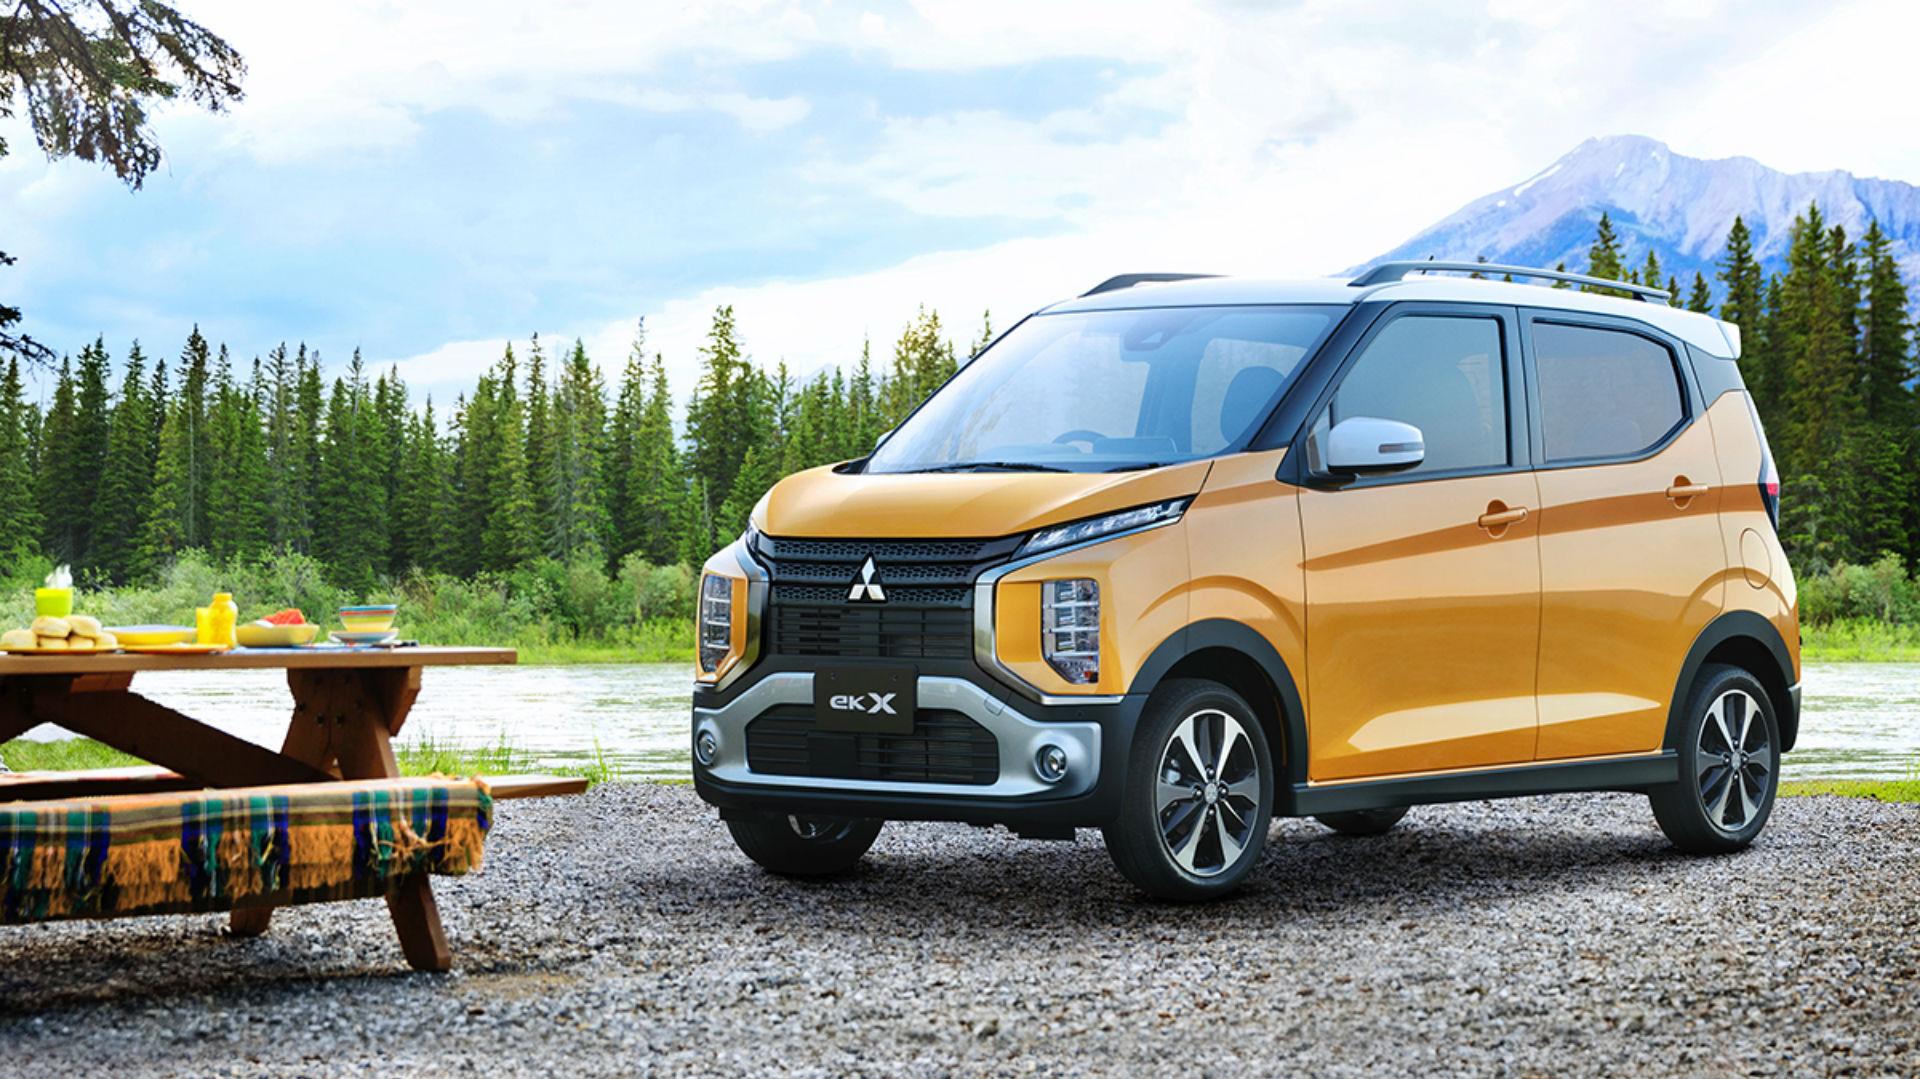 This tiny Mitsubishi is Japanese car journalists car of the year